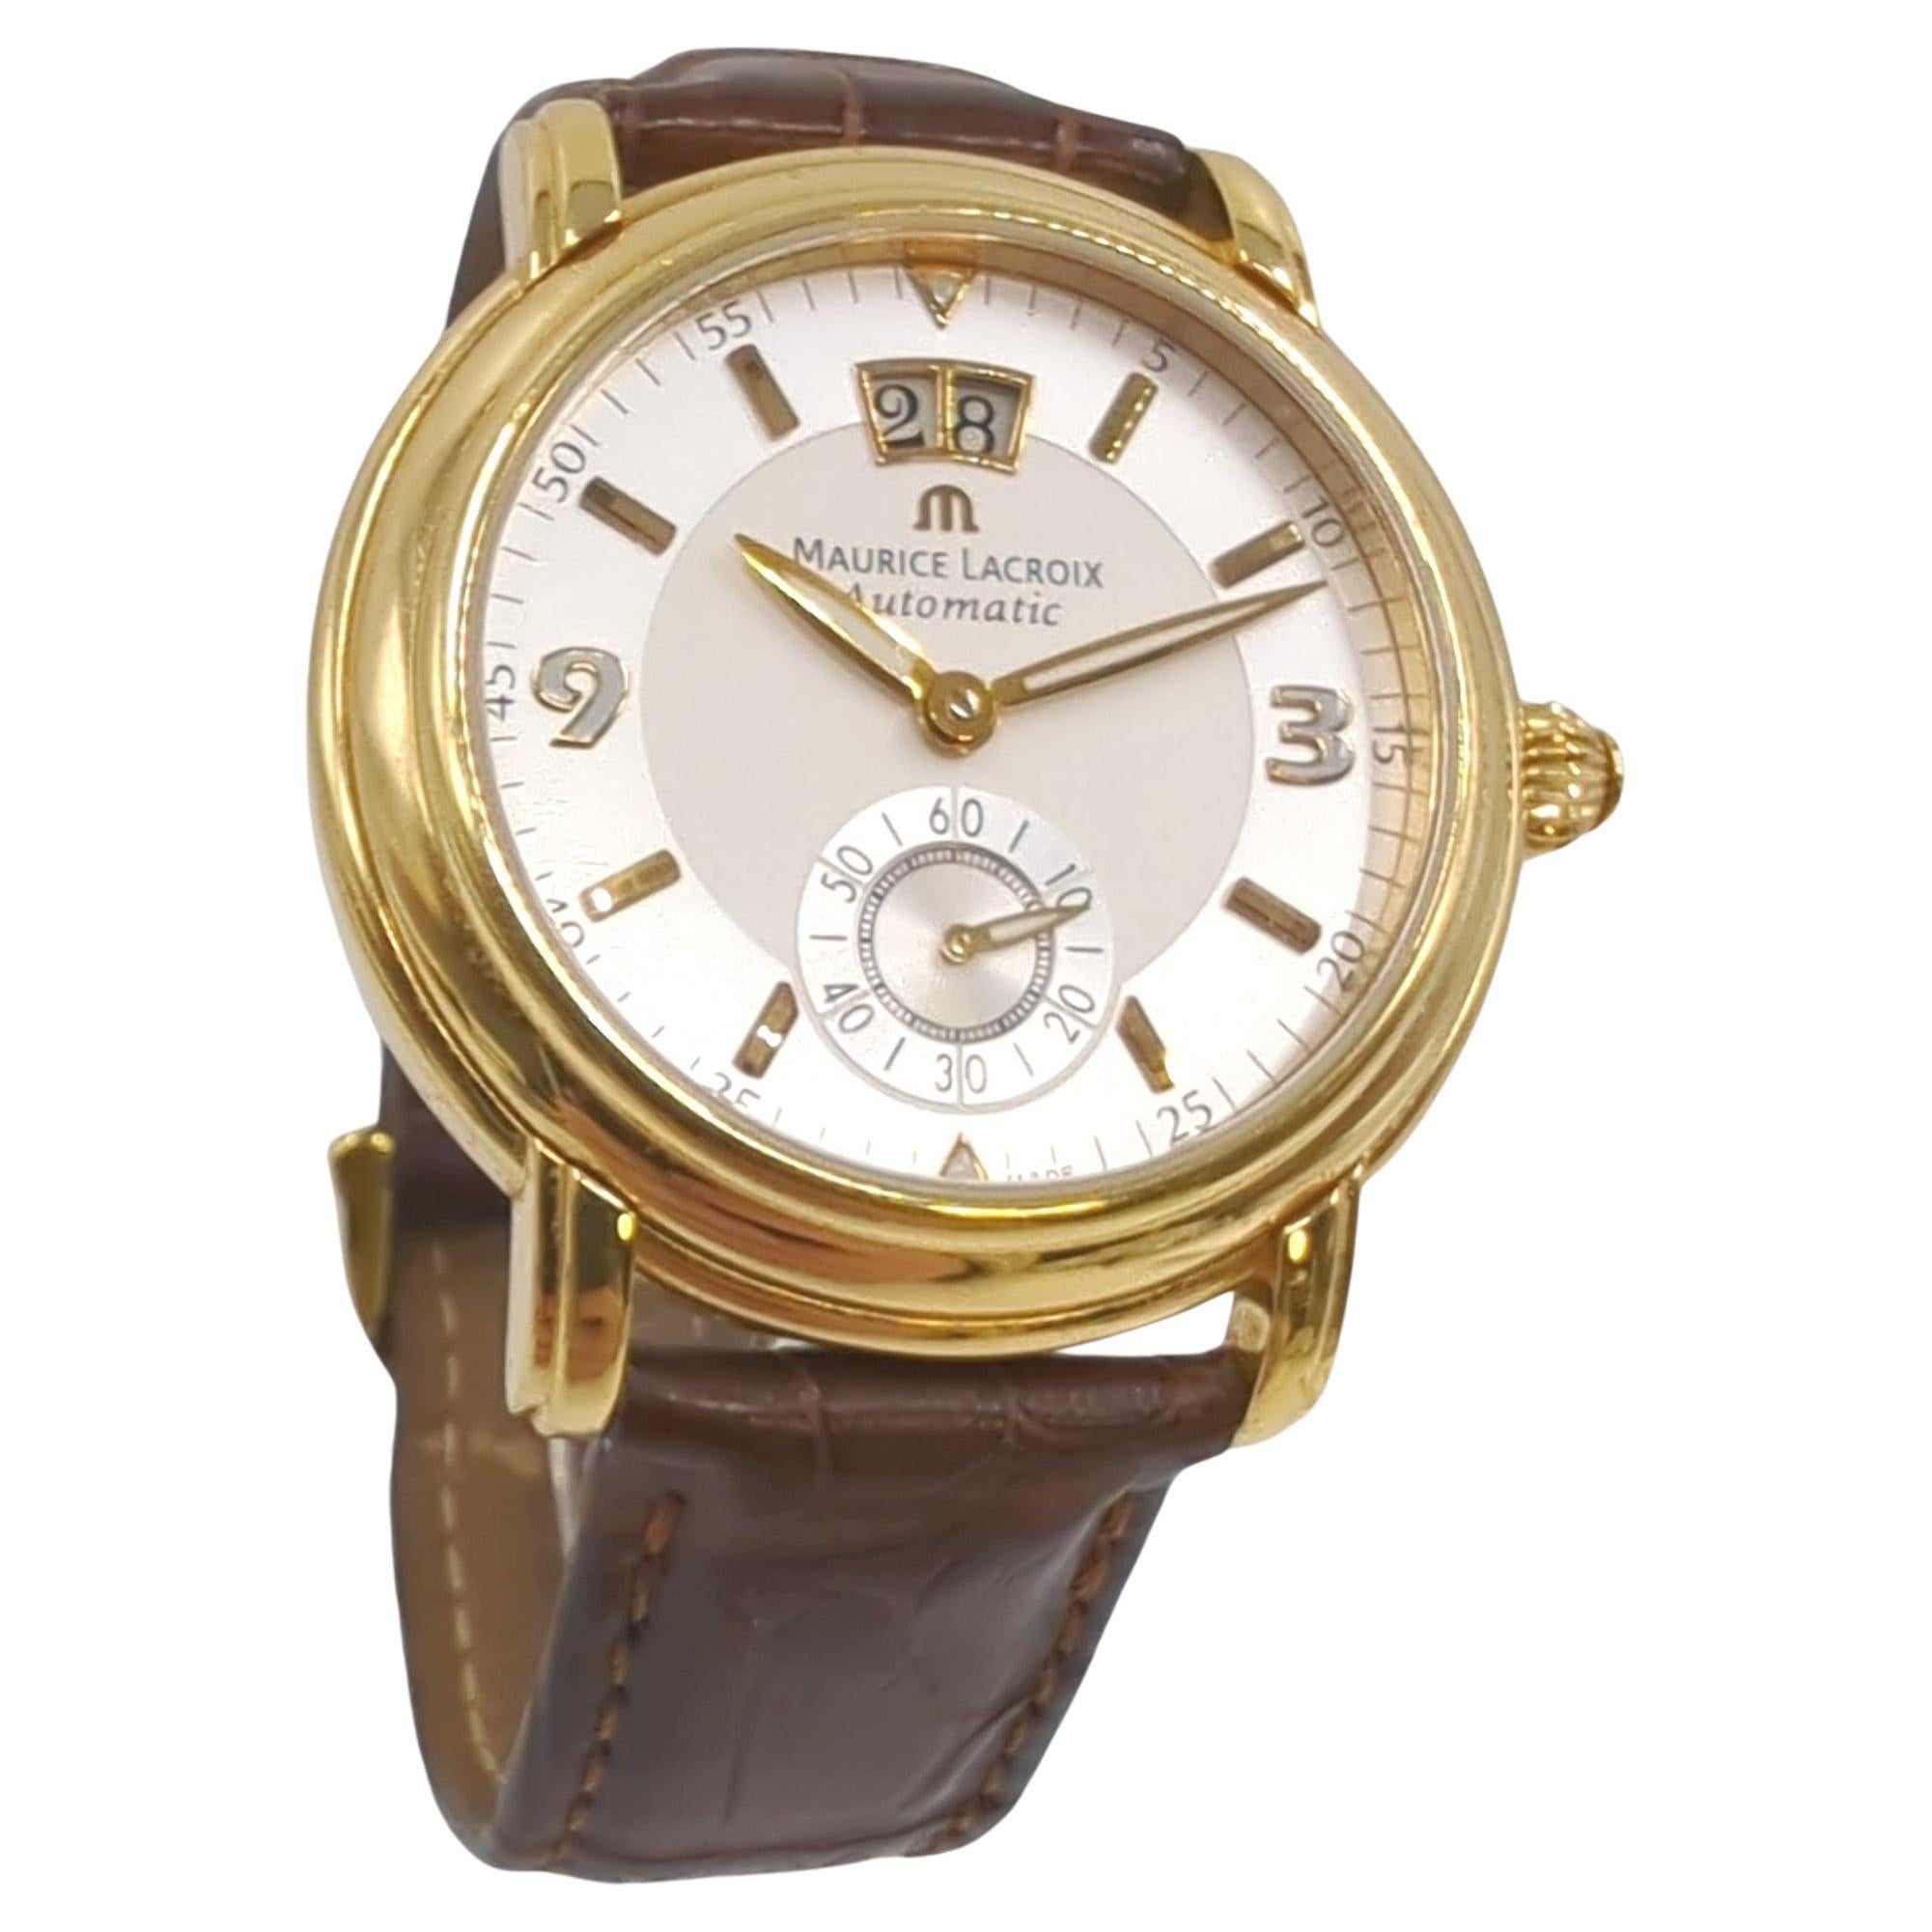 maurice lacroix gold watch